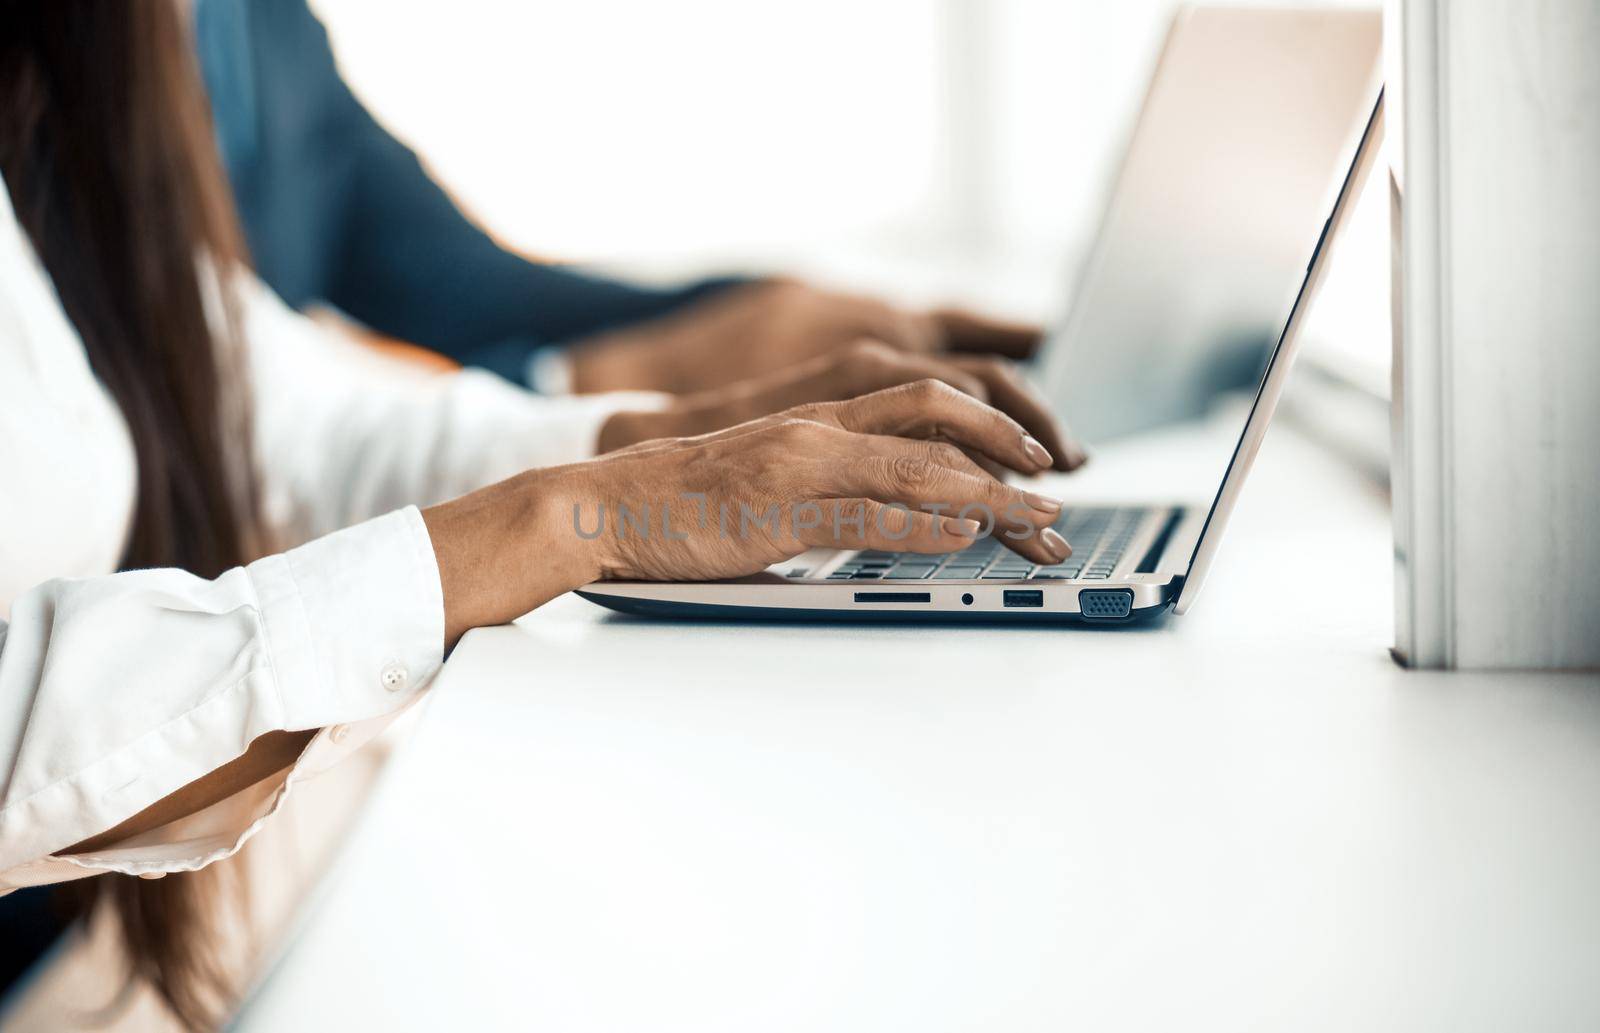 Businesspeople typing on laptop keyboard. Close up of Caucasian female hands working on computer at office desk. Copy space at bottom of image.